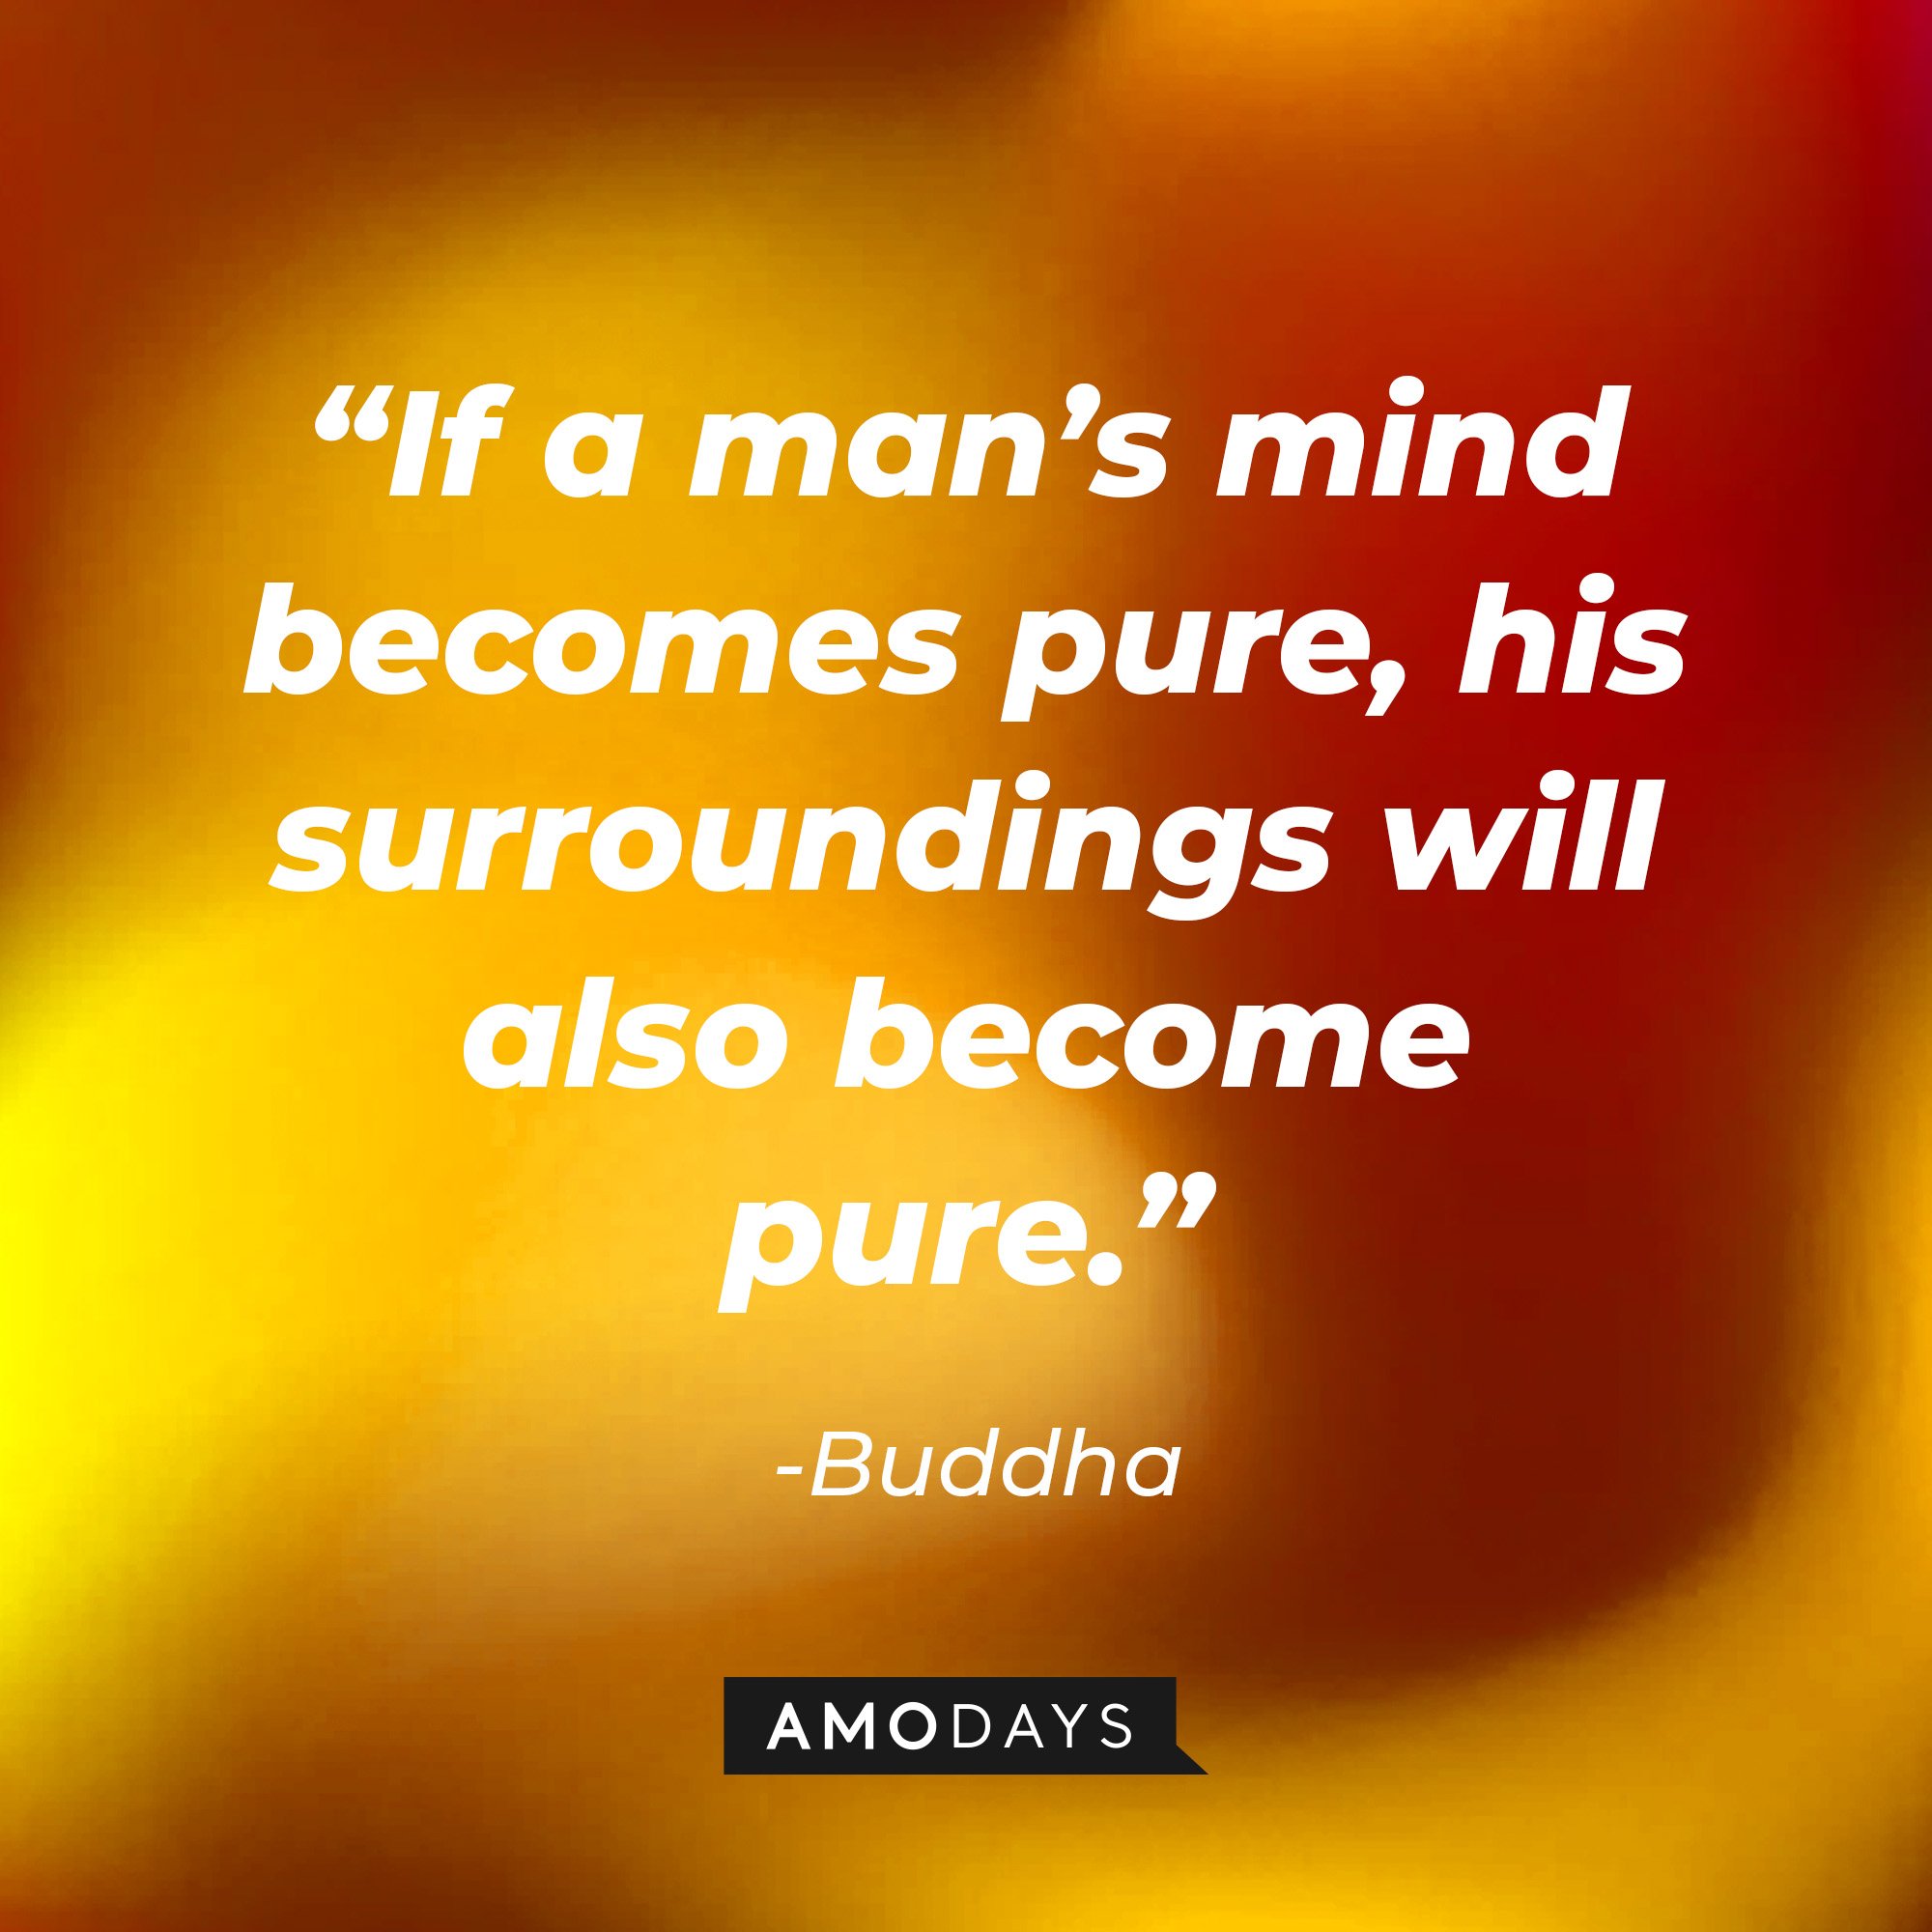 Buddha's quote: “If a man’s mind becomes pure, his surroundings will also become pure.” | Image: AmoDays